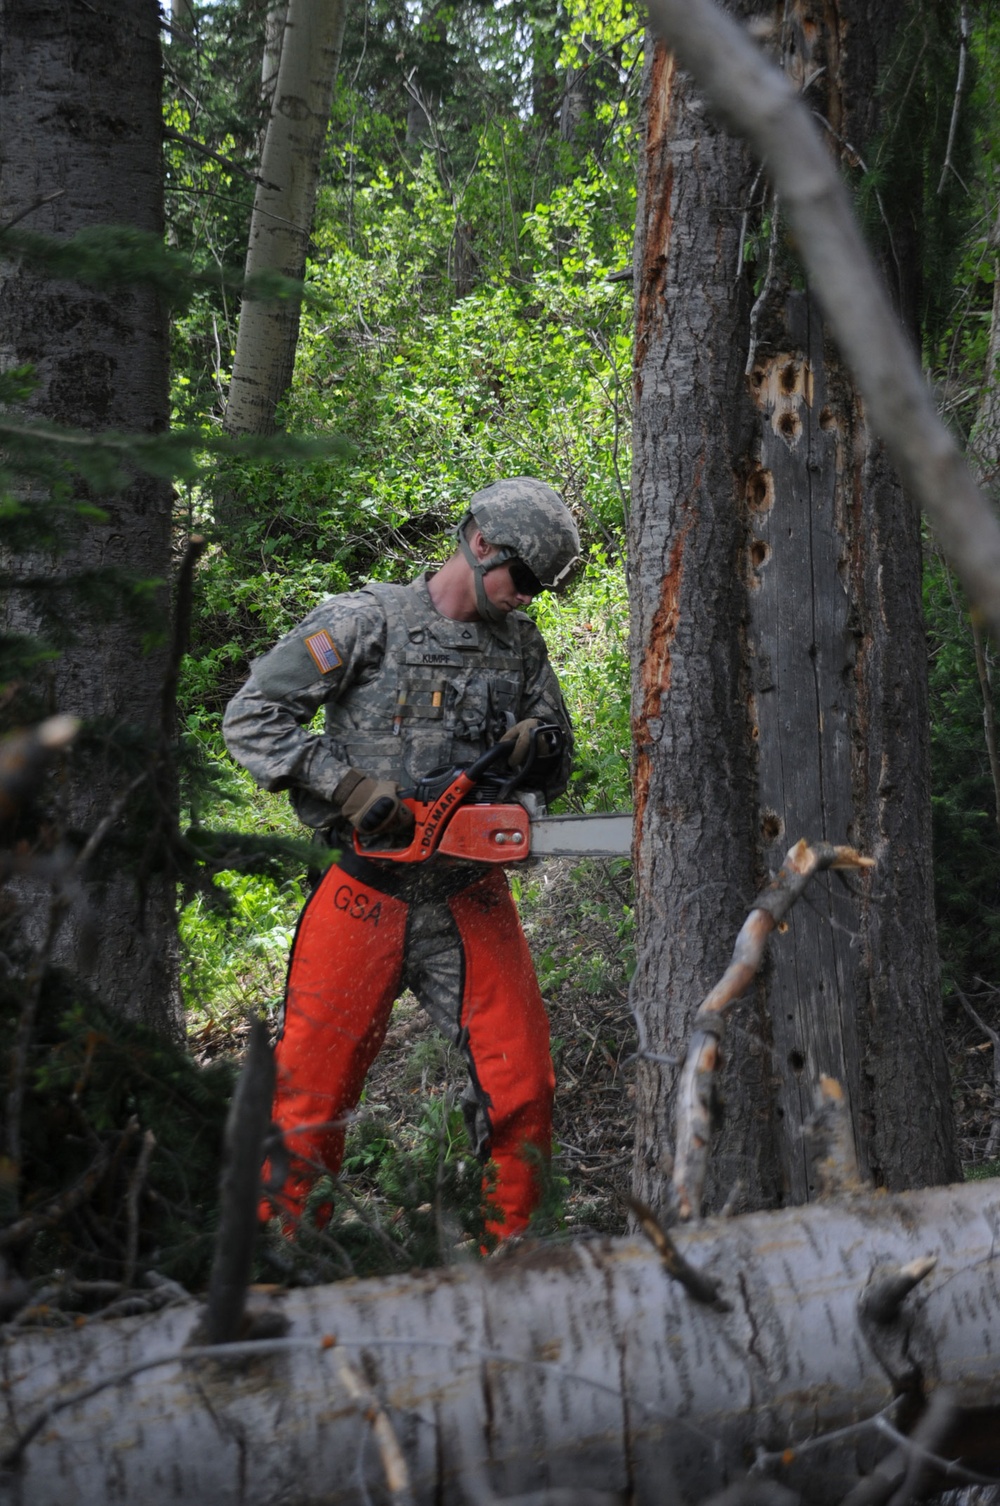 Utah Sappers Conduct Demolition Training in National Forest at Strawberry Reservoir